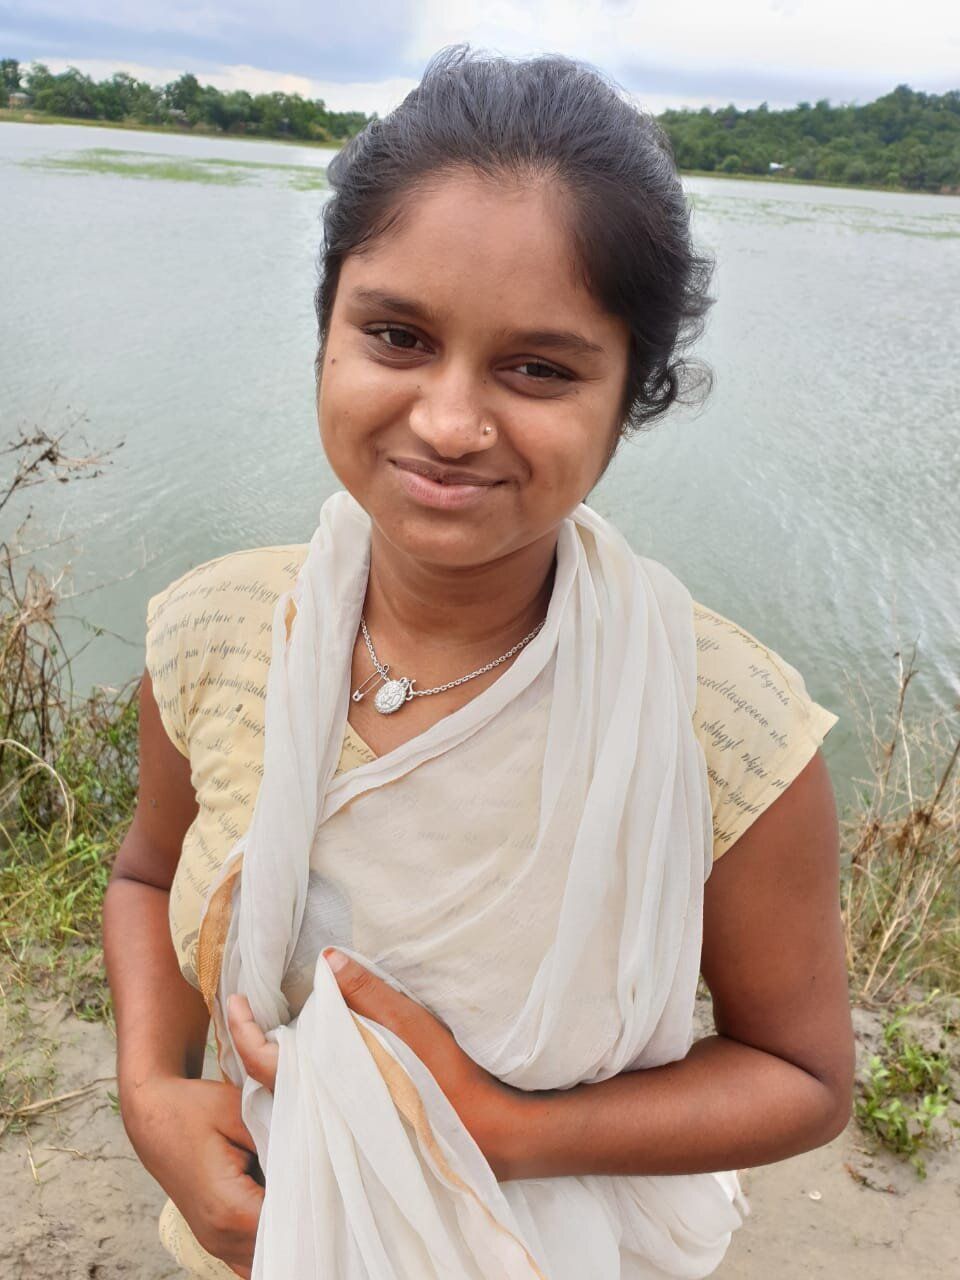 15-year-old Kalpana is uneducated, as she had to discontinue school after landing in a detention camp.